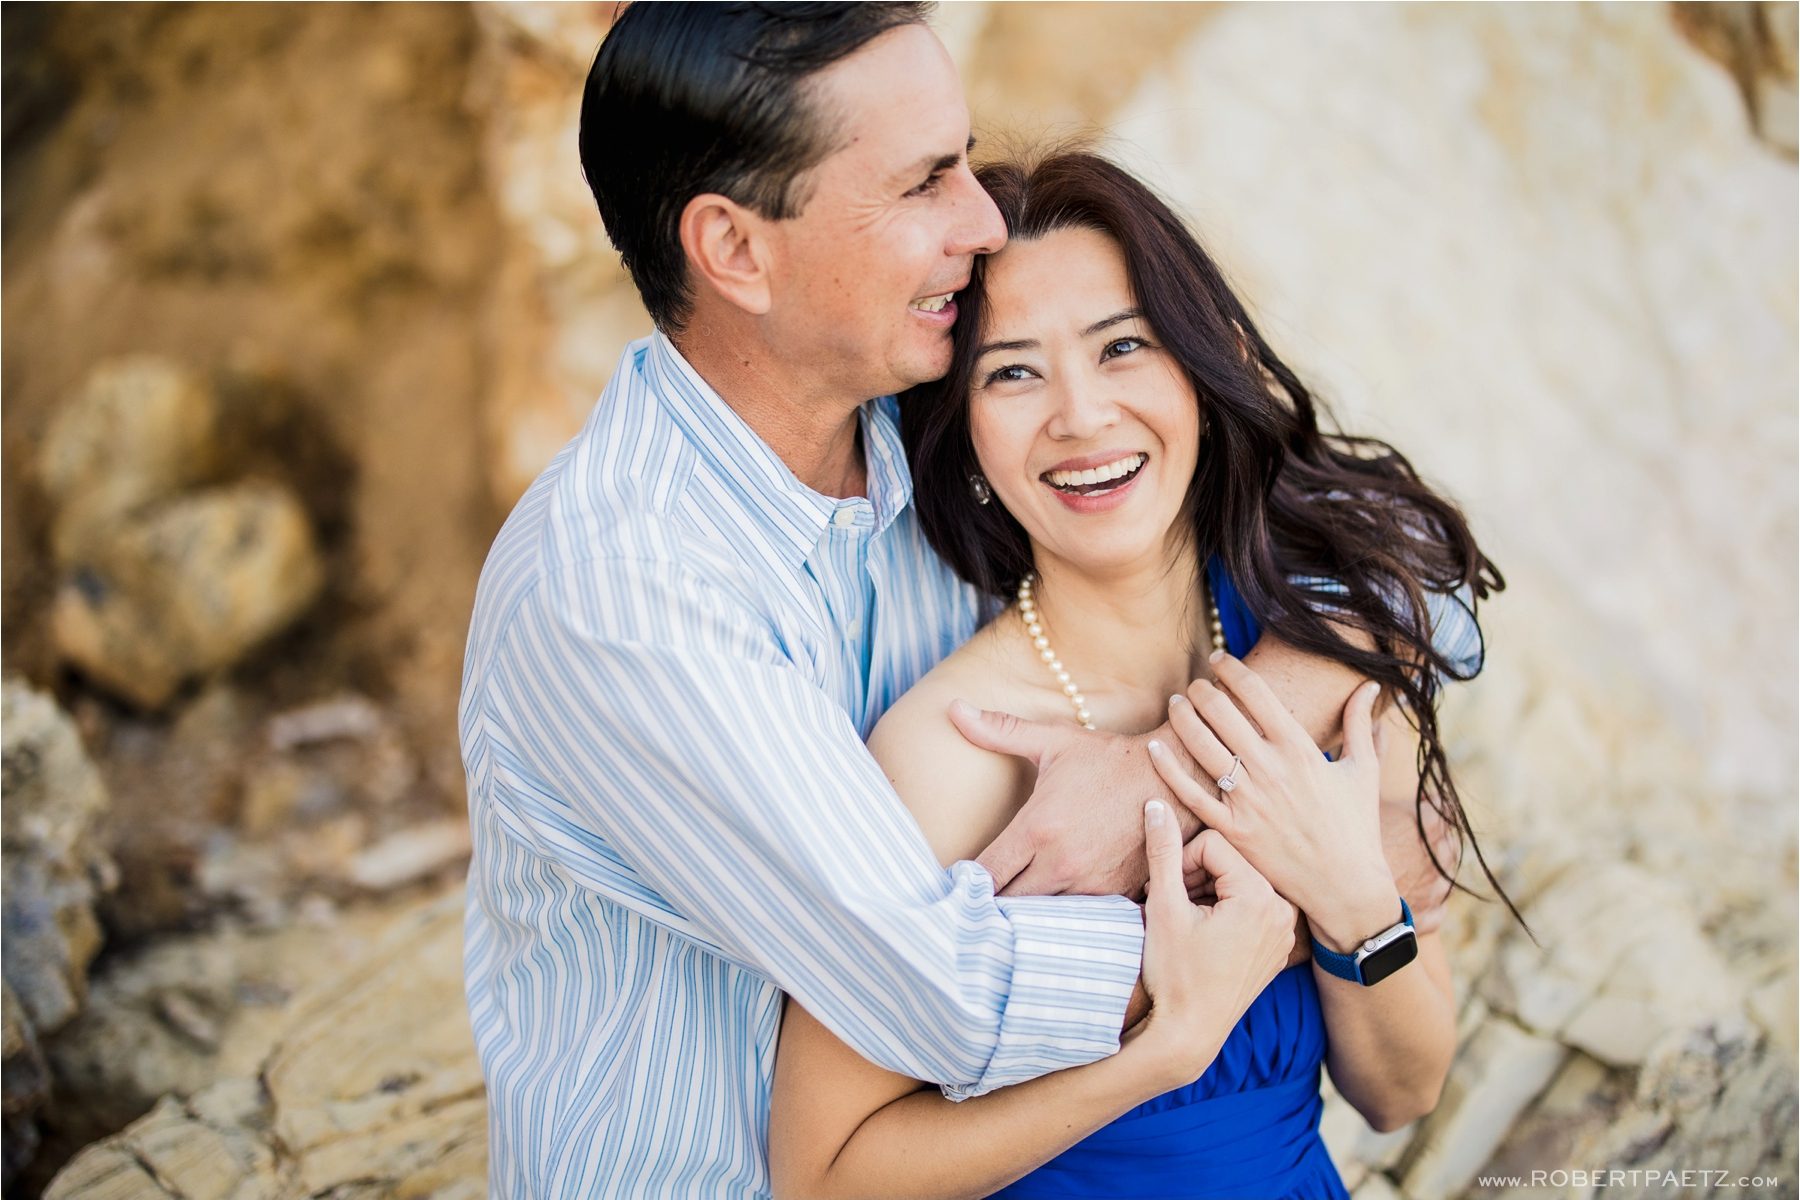 An Engagement photography session at Crystal Cove State Park in Newport Beach, California photographed by the destination wedding photographer, Robert Paetz, who is based in Los Angeles. 